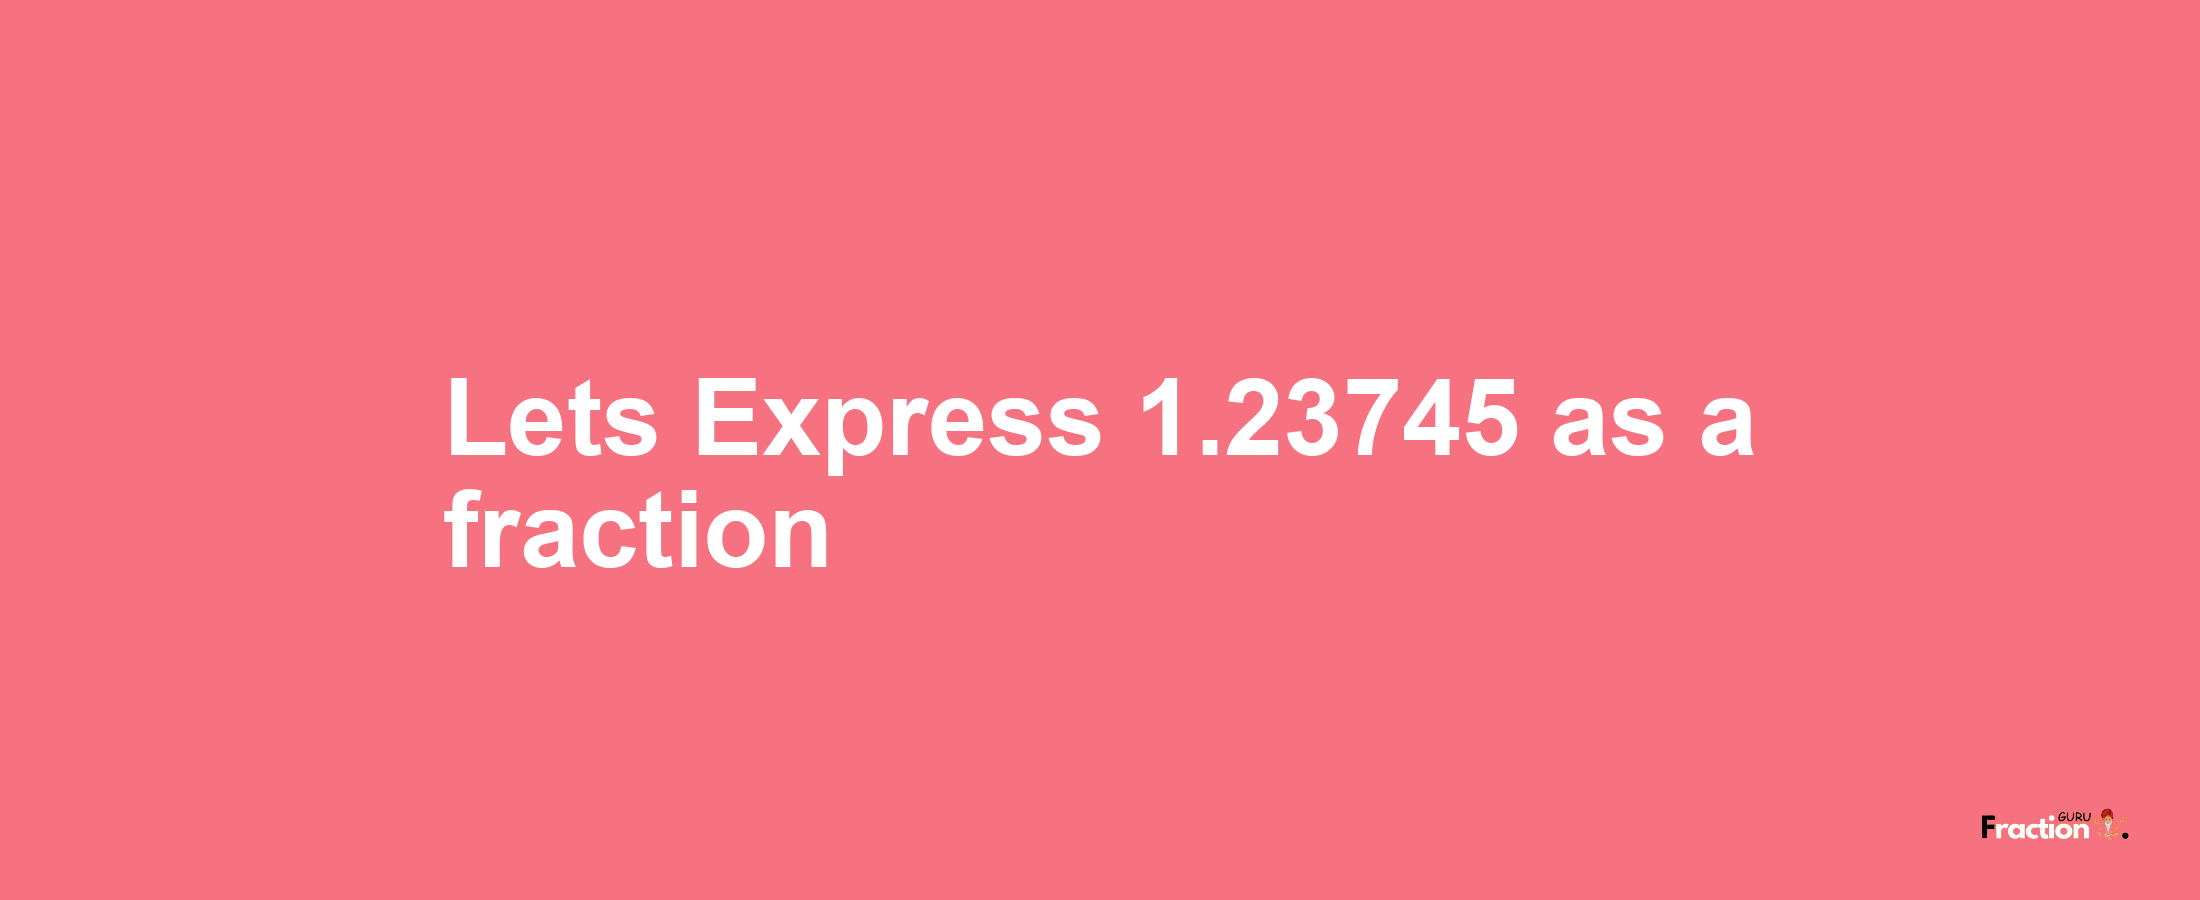 Lets Express 1.23745 as afraction